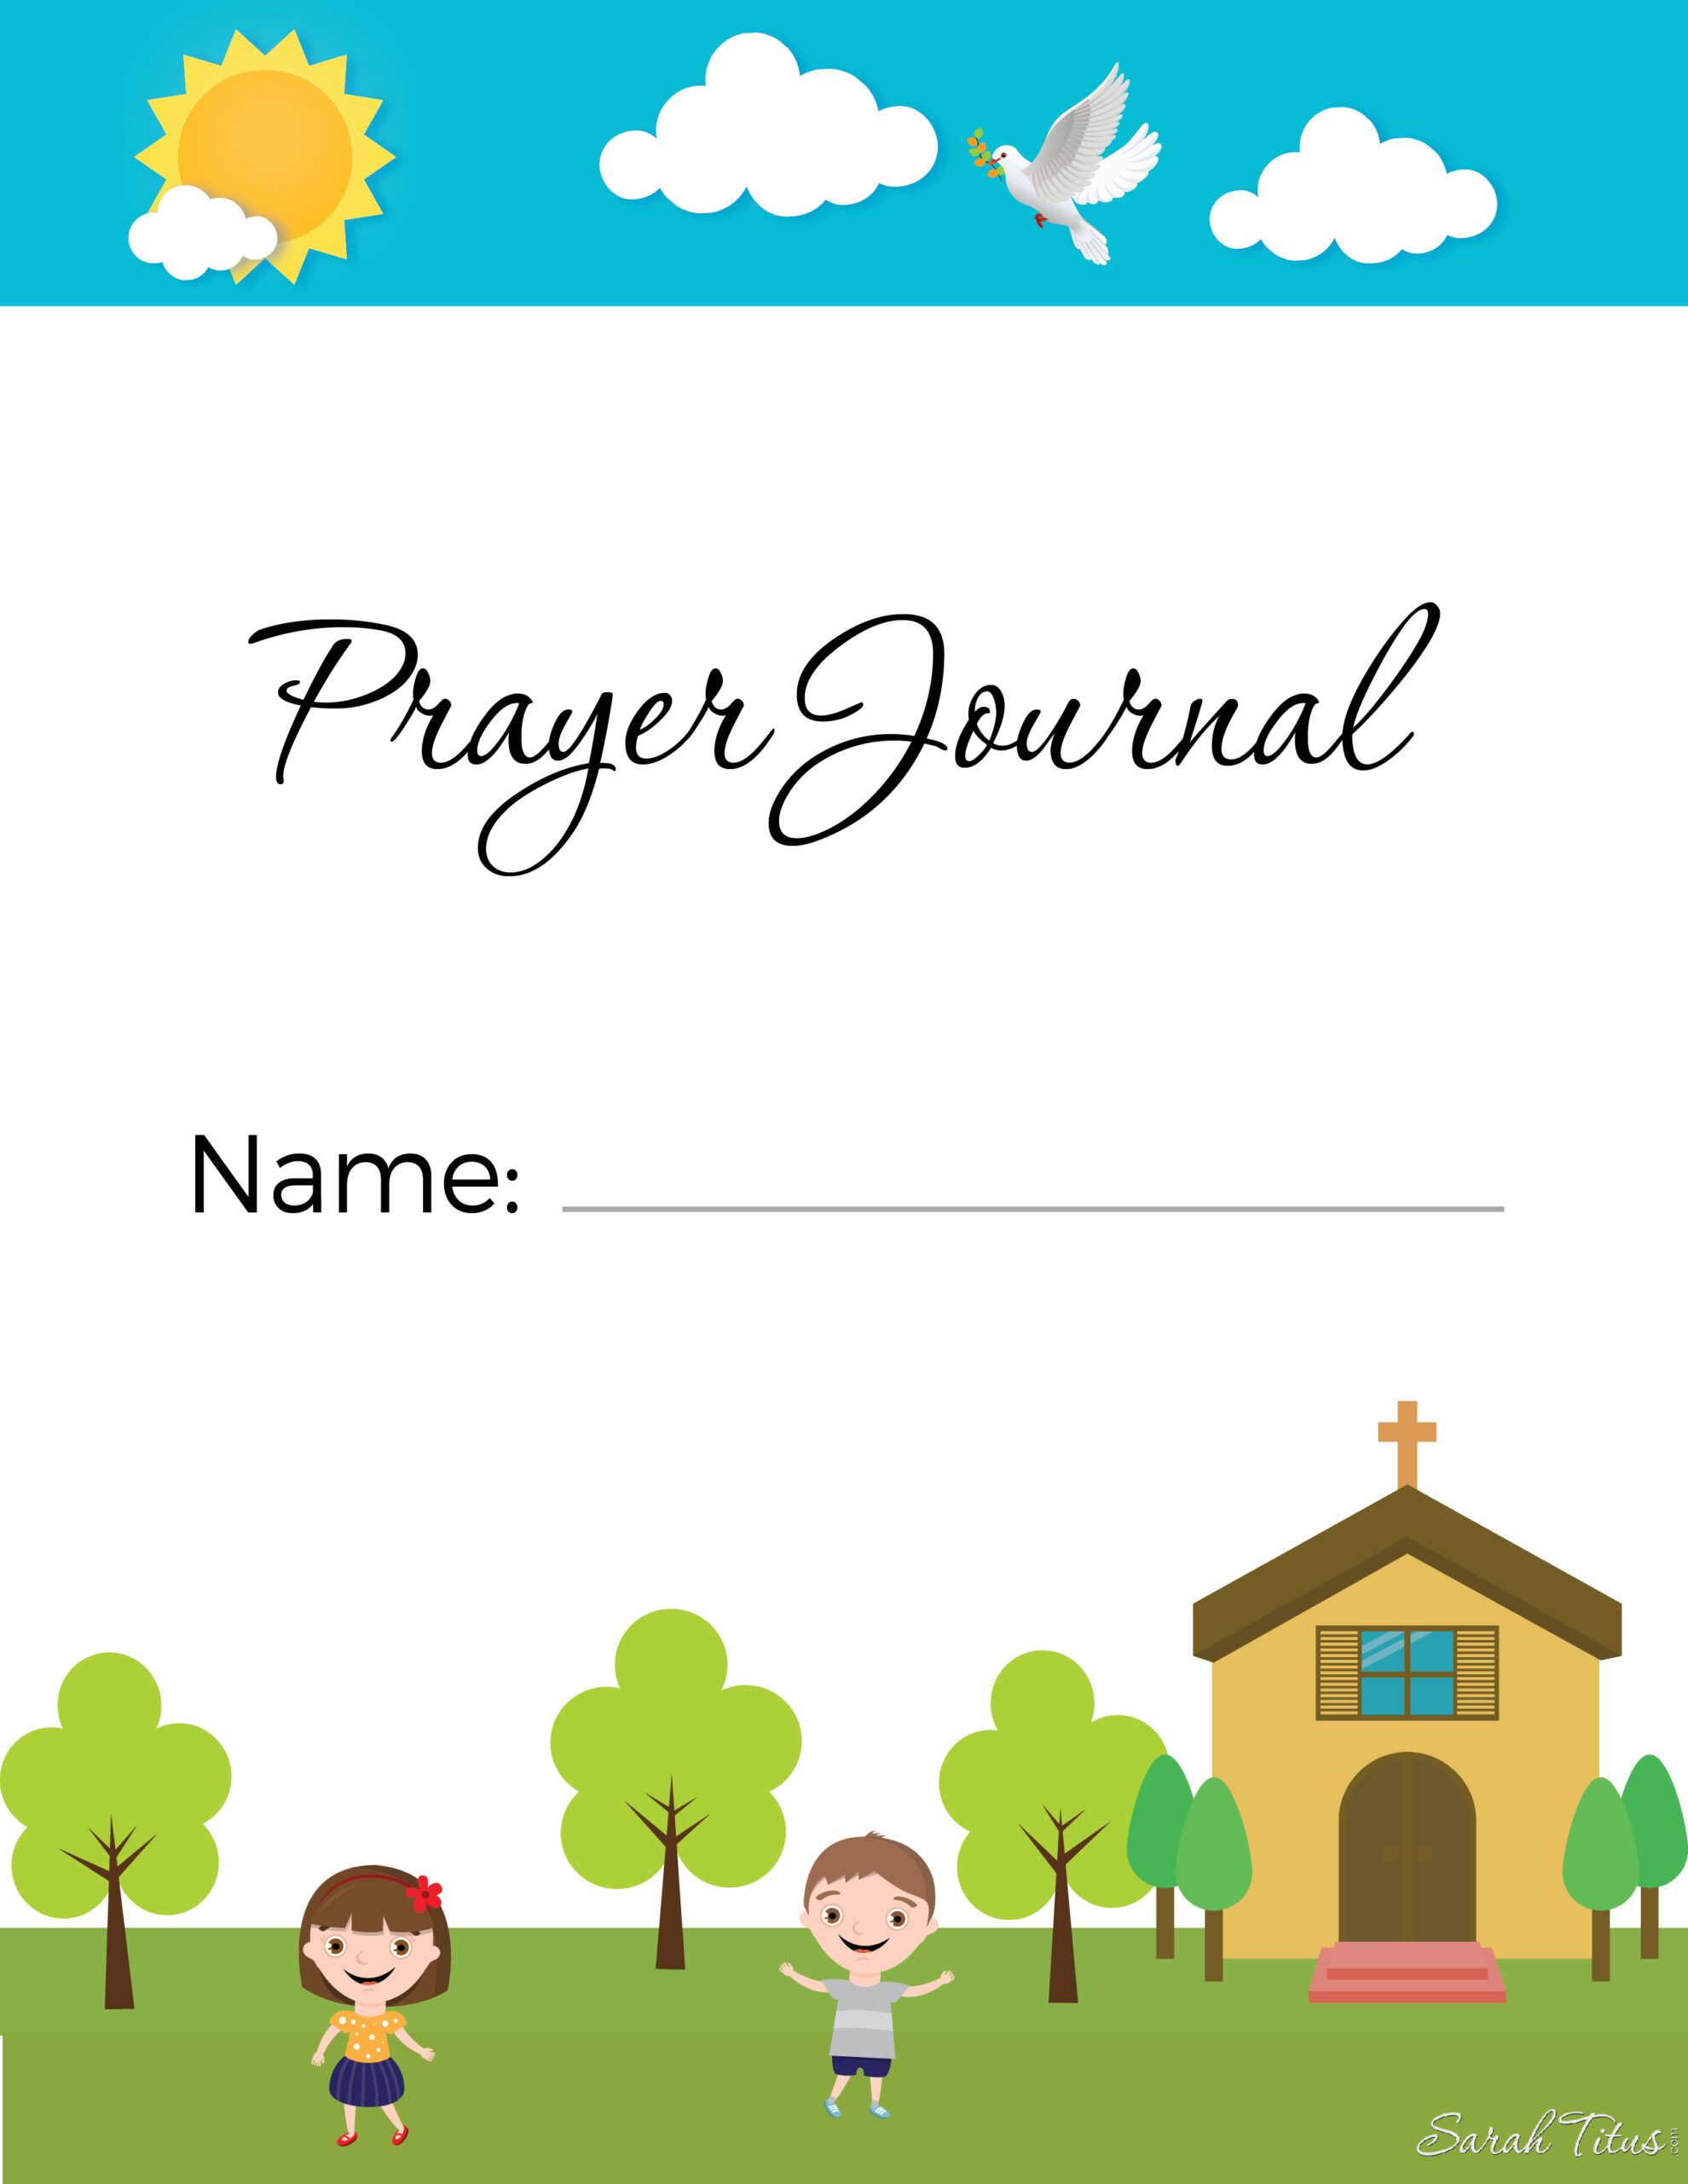 A rock-solid prayer life is one of the best gifts you can give your kids, but it can be difficult to get them there. Here's how to start a kid's prayer journal and get them excited about praying, plus some free printables to boot!